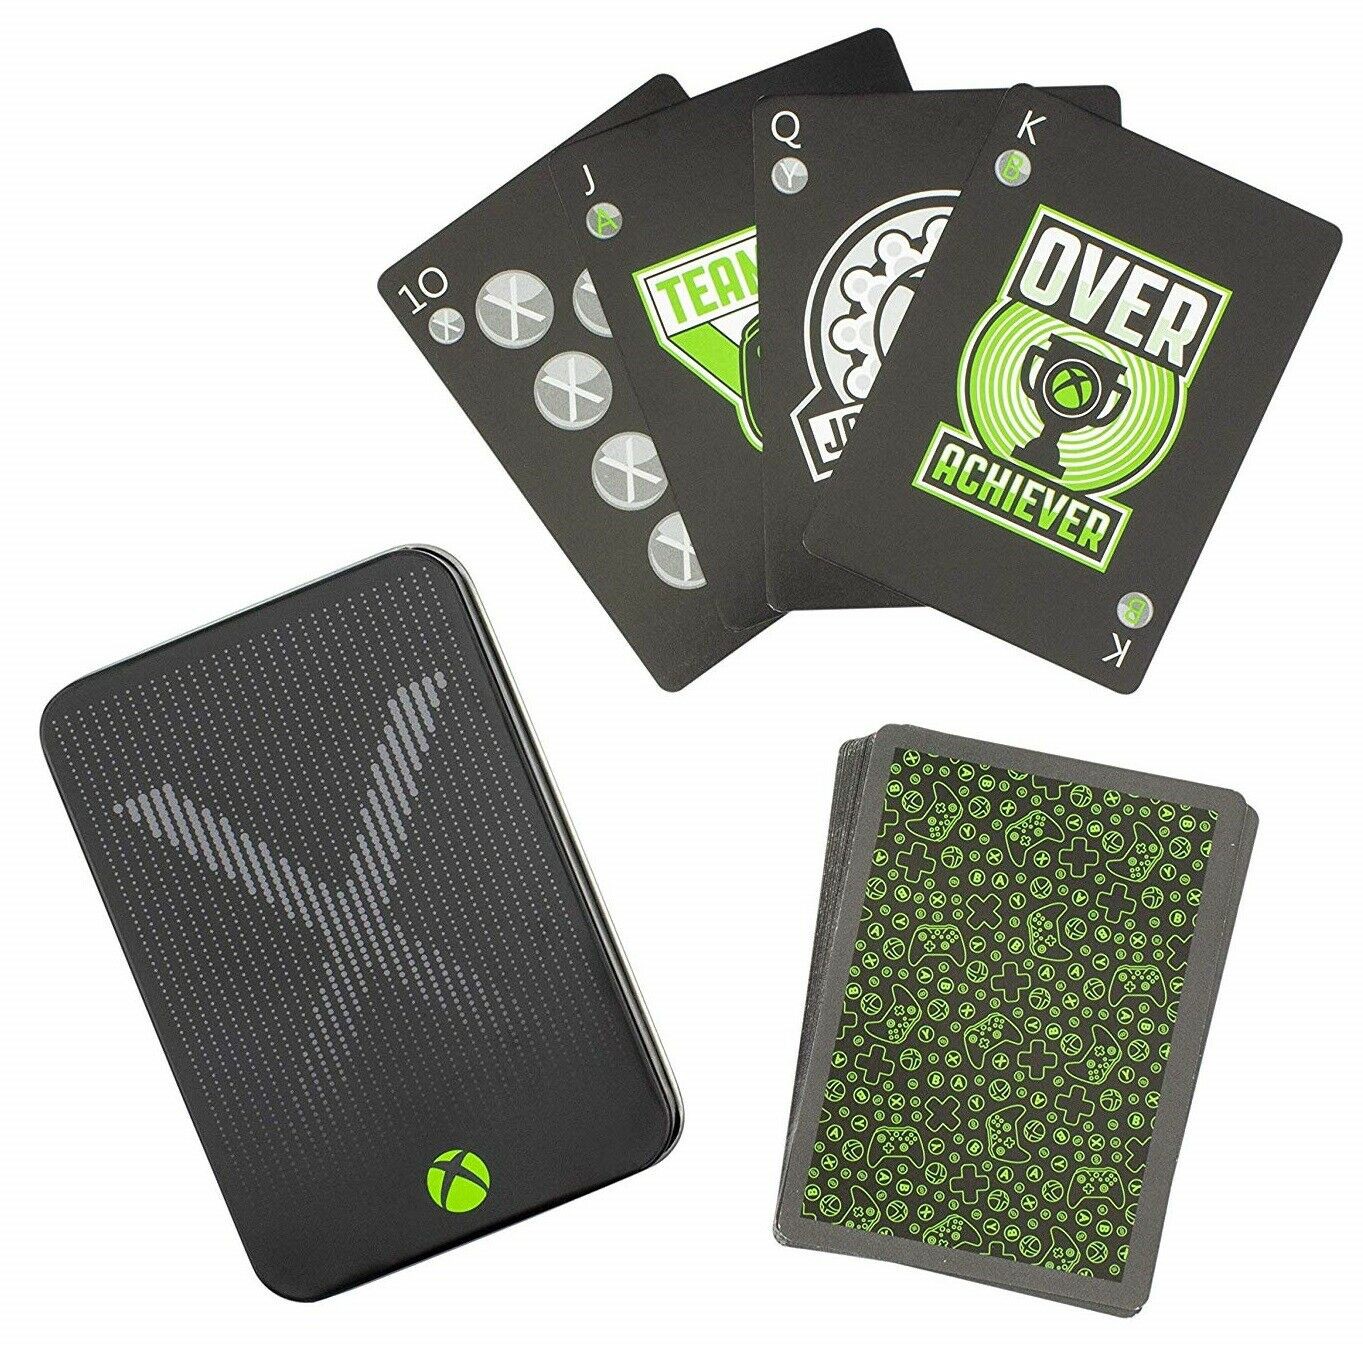 XBOX - Playing Cards